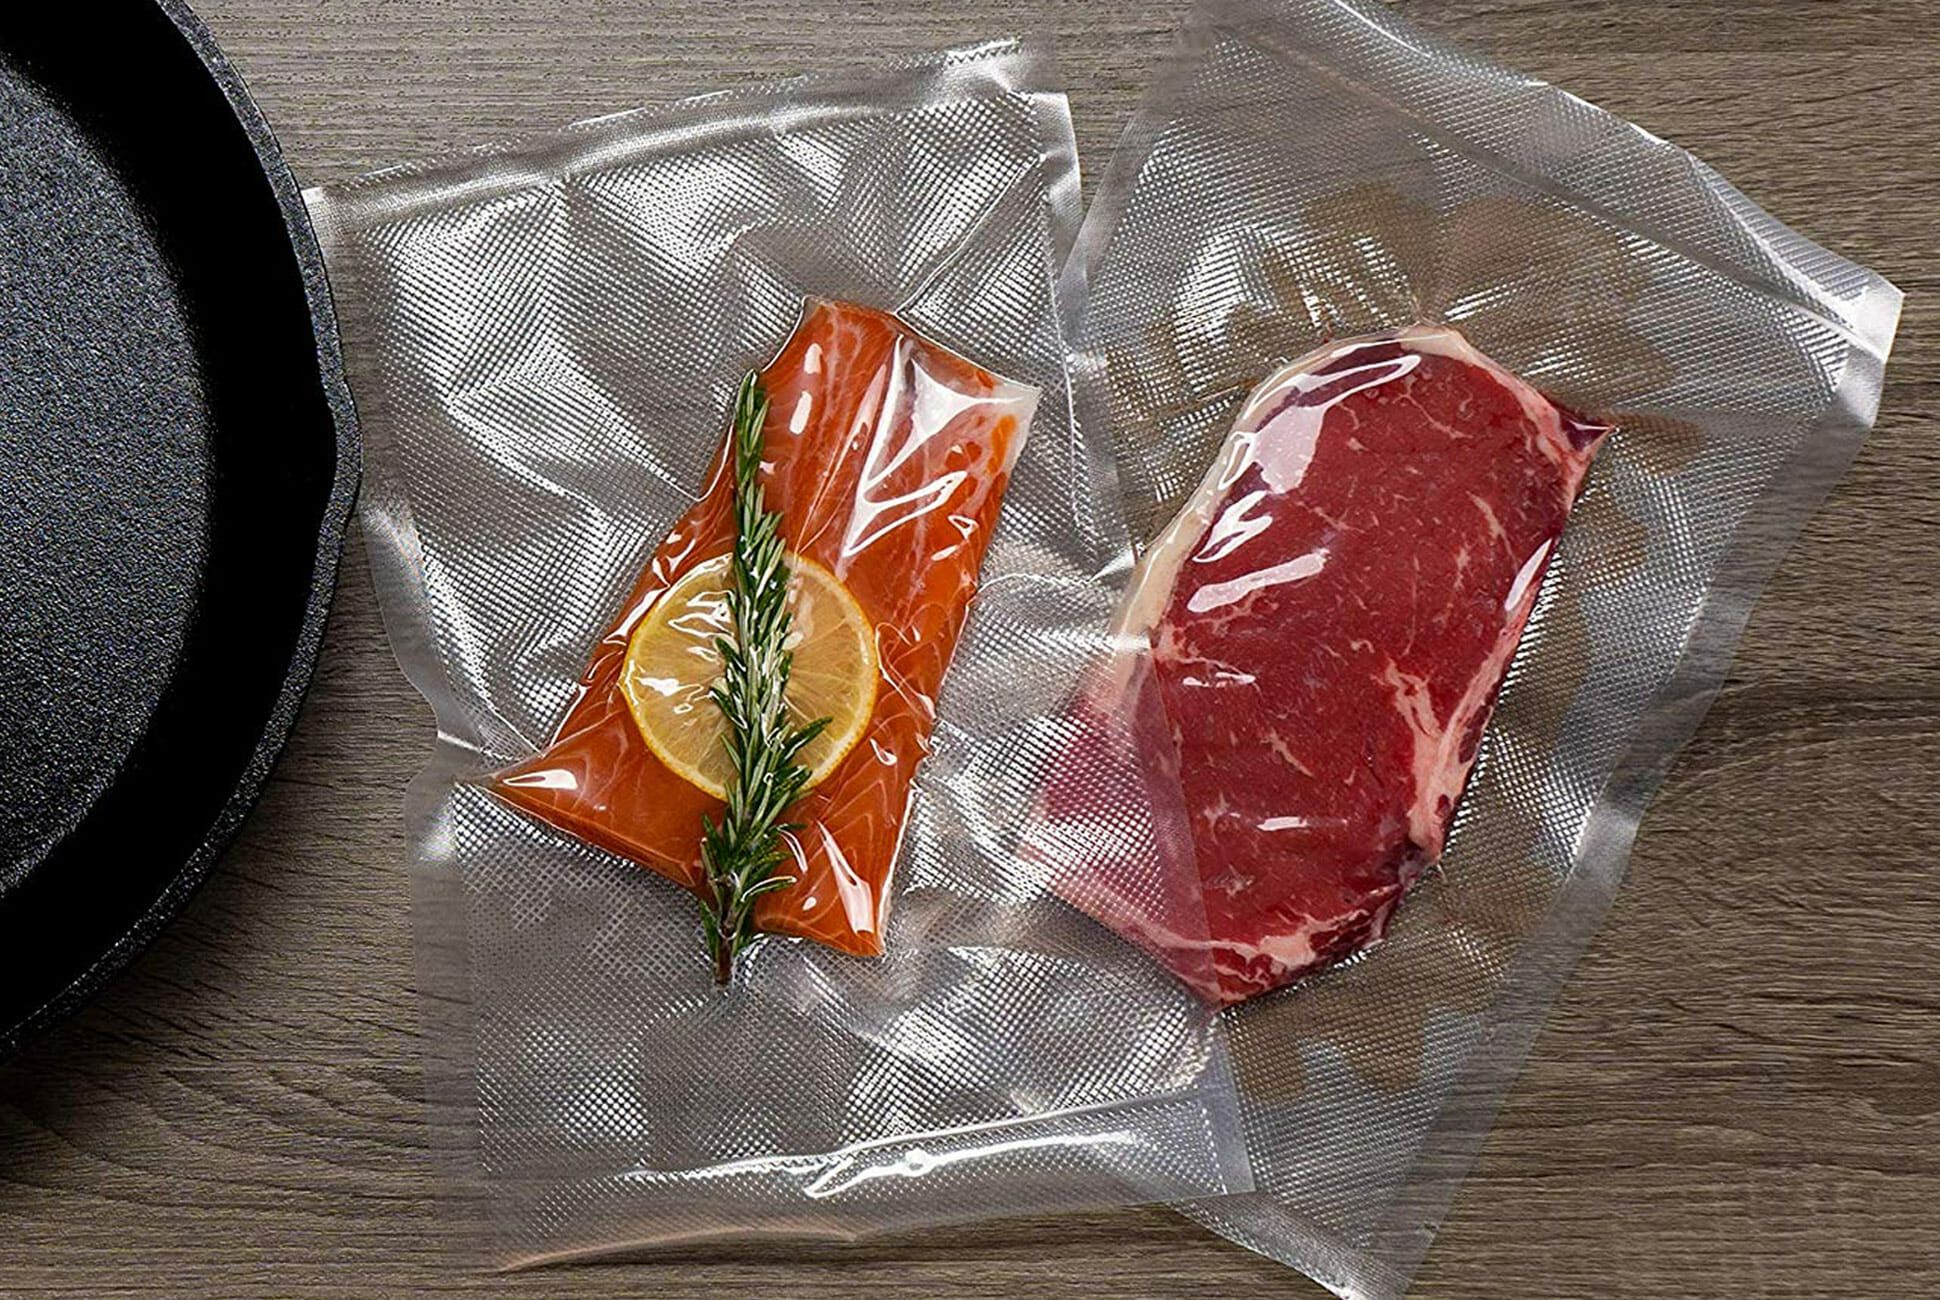 Best Way to Seal Food for Sous Vide